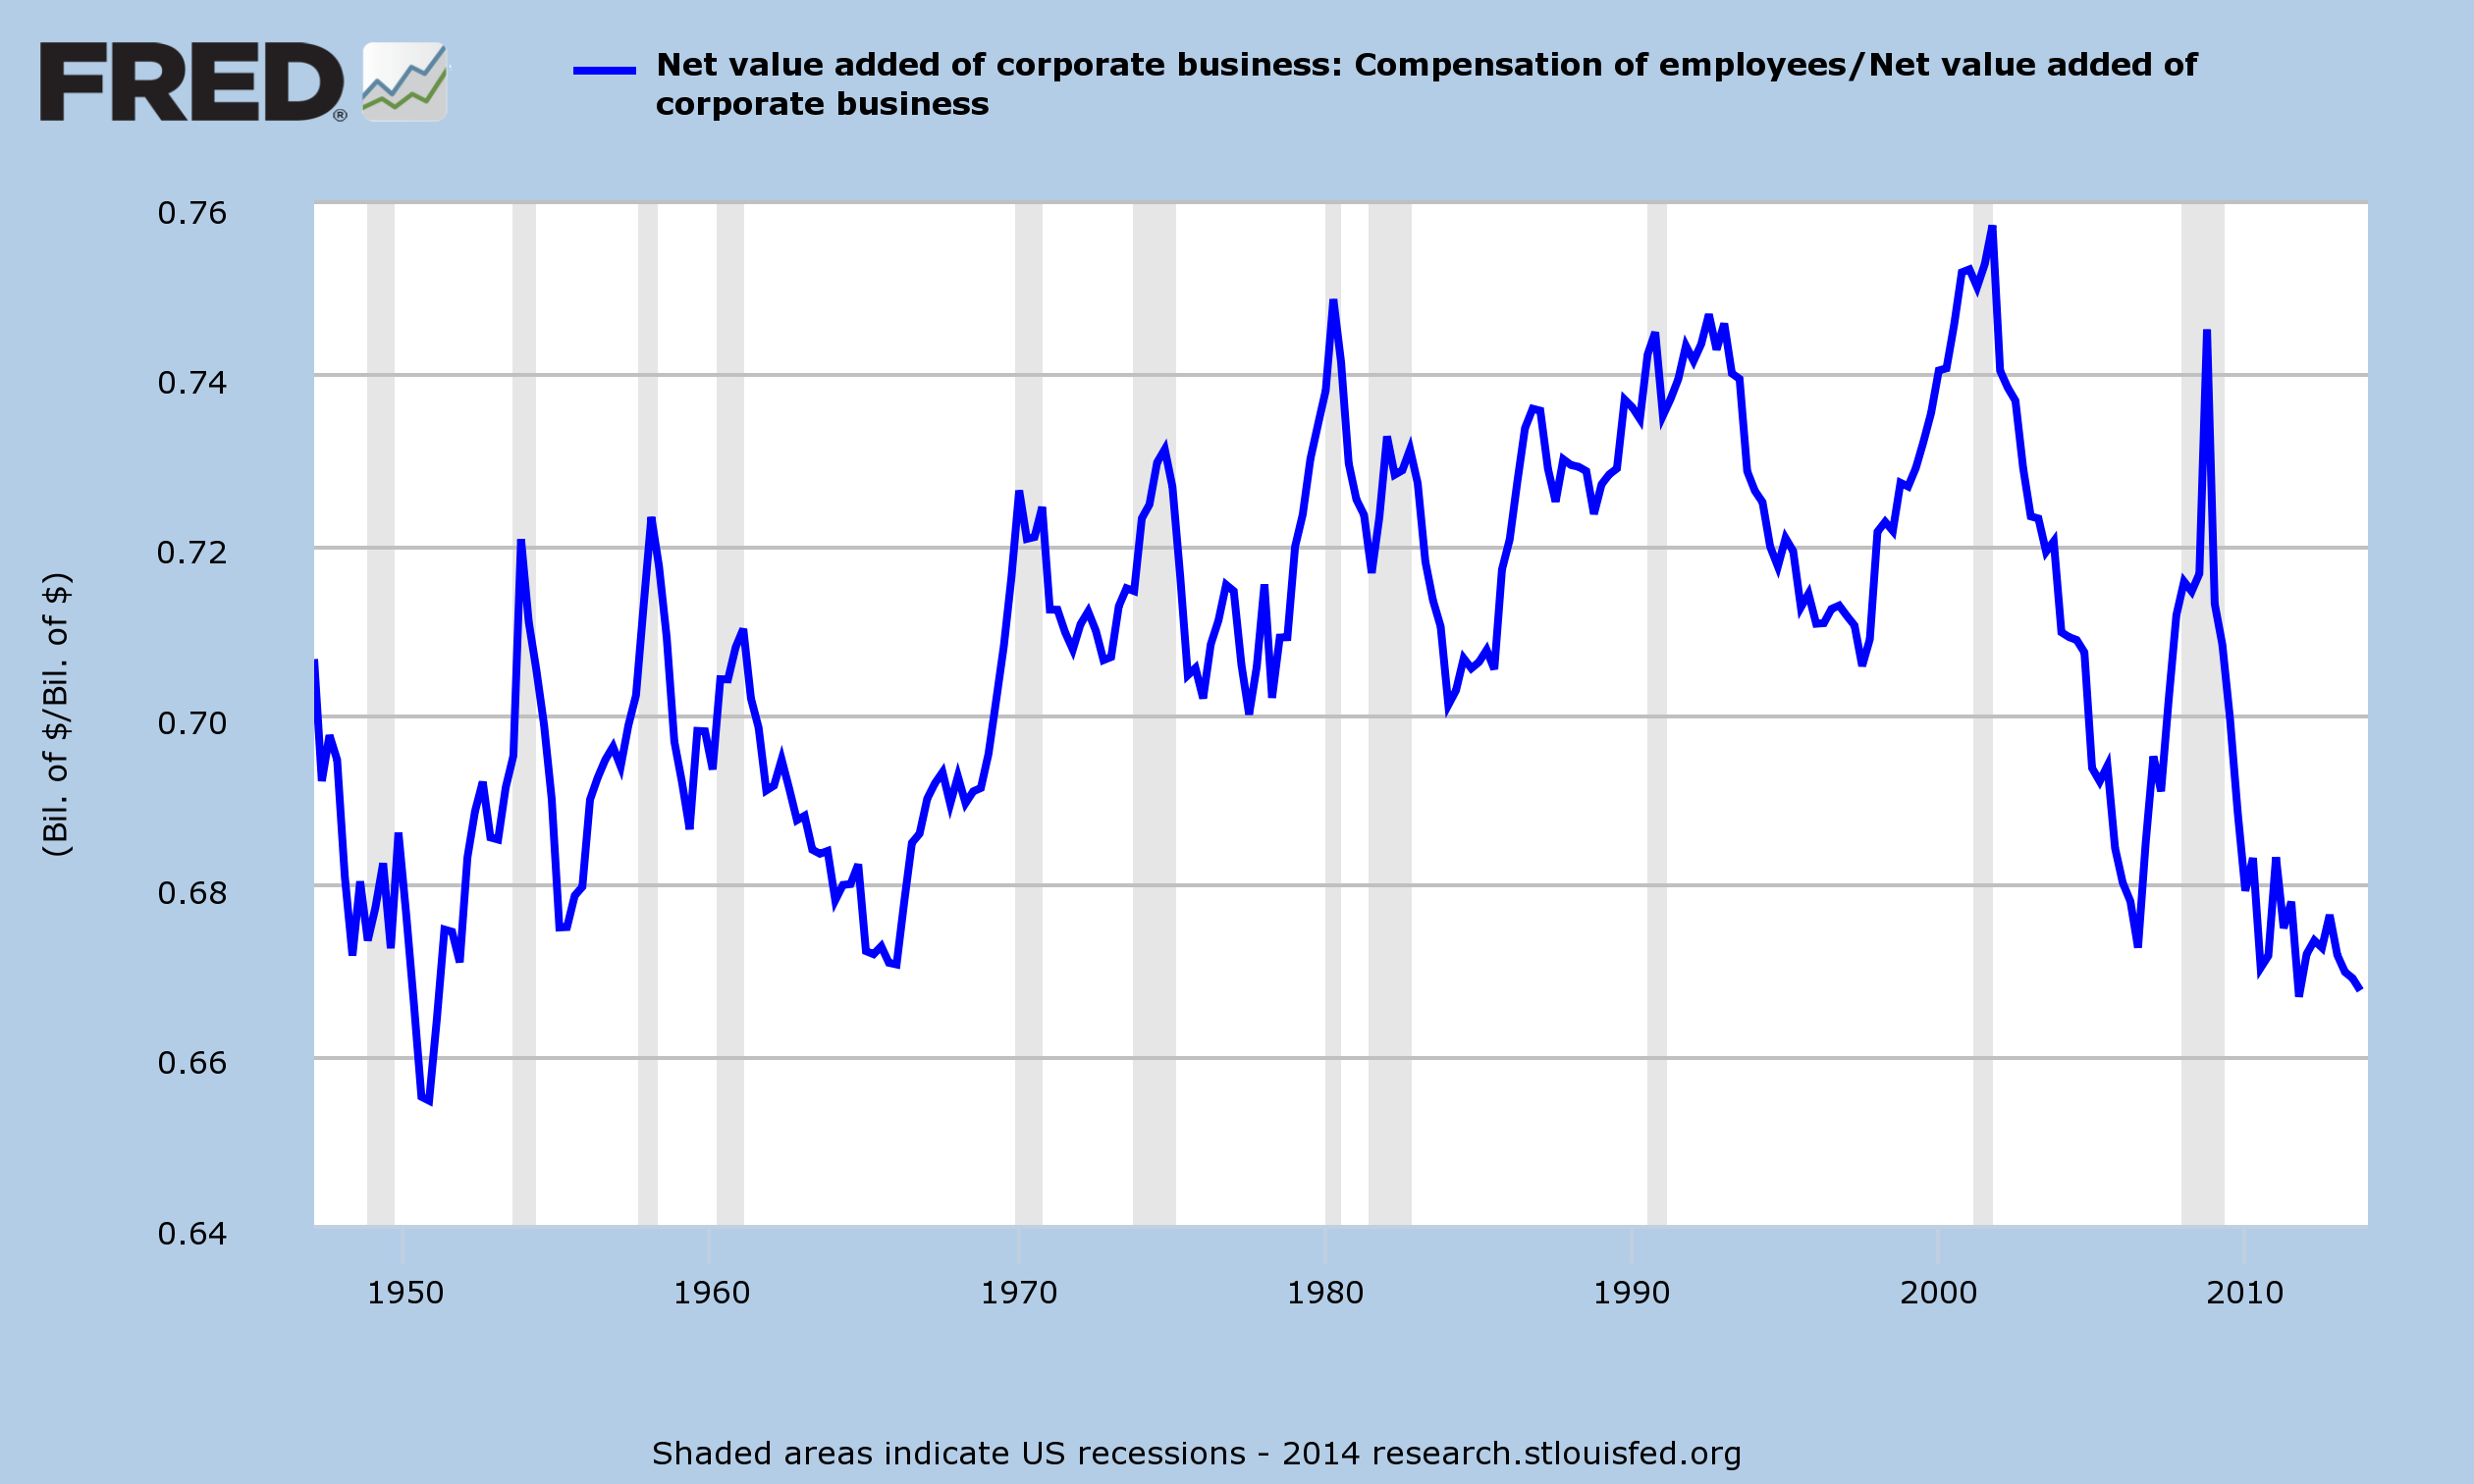 Employee Compensation/Value Added